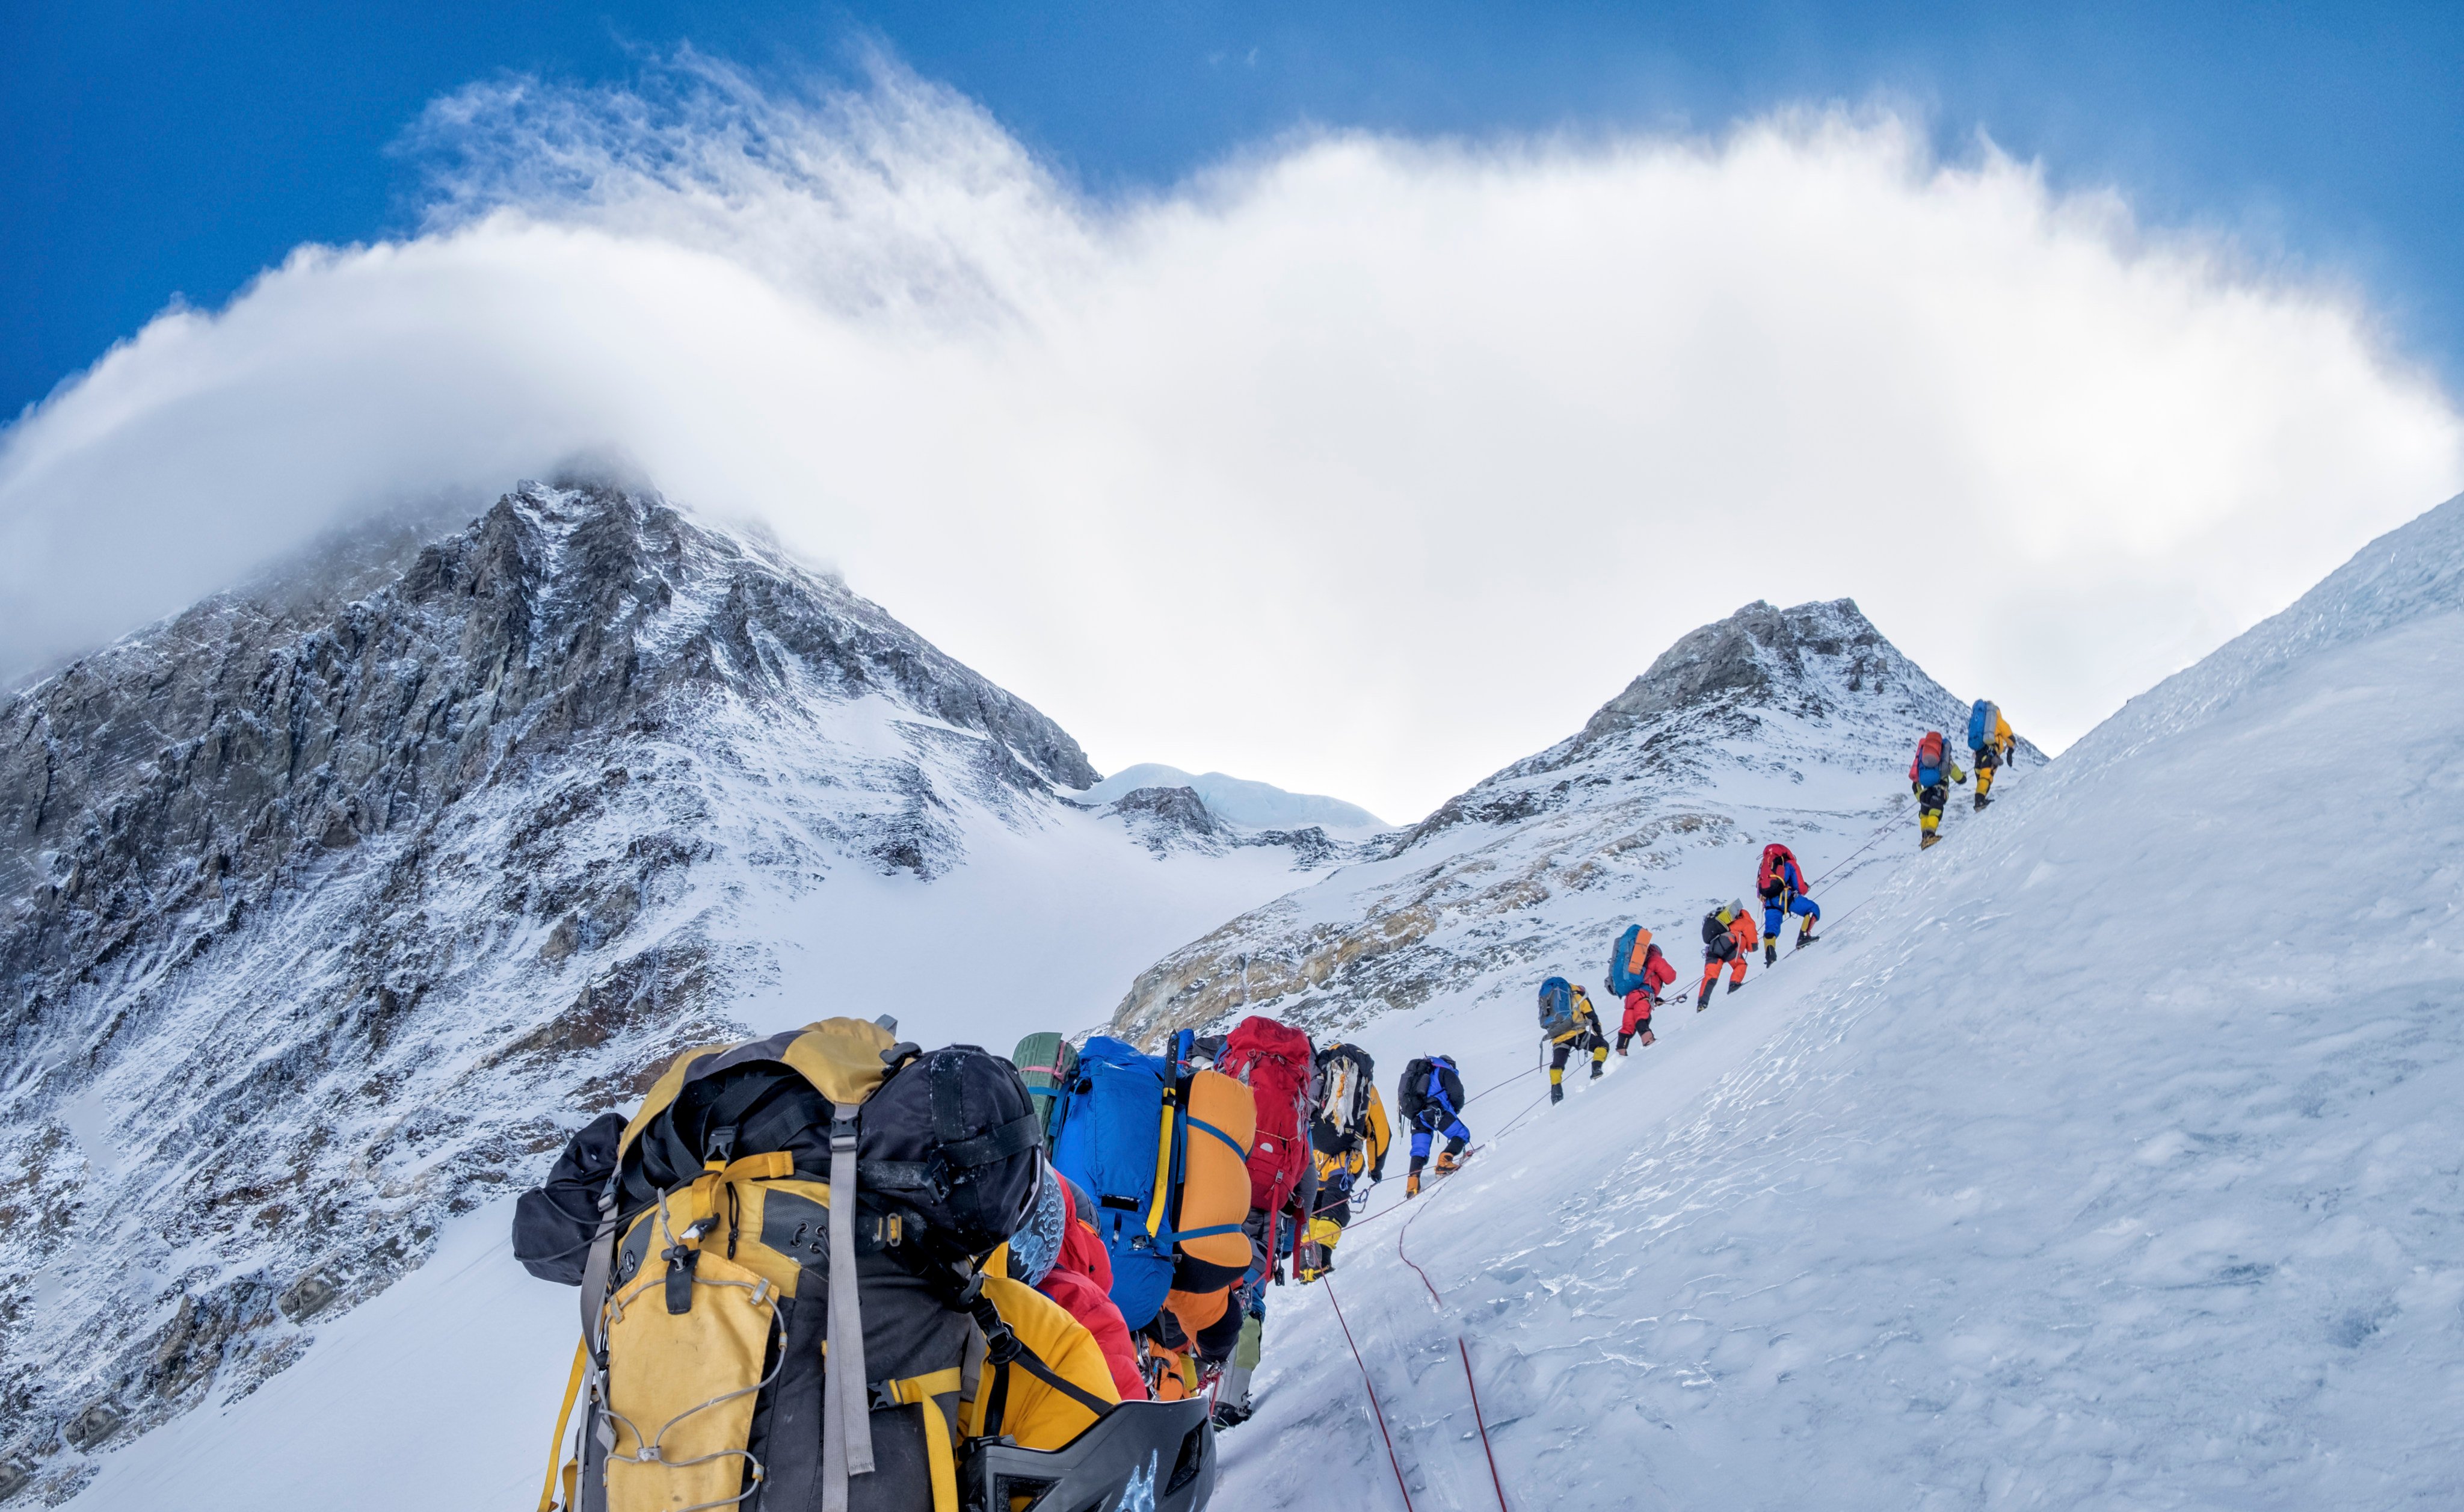 Everest continues to attract climbers 70 years after first summit, Mount  Everest News